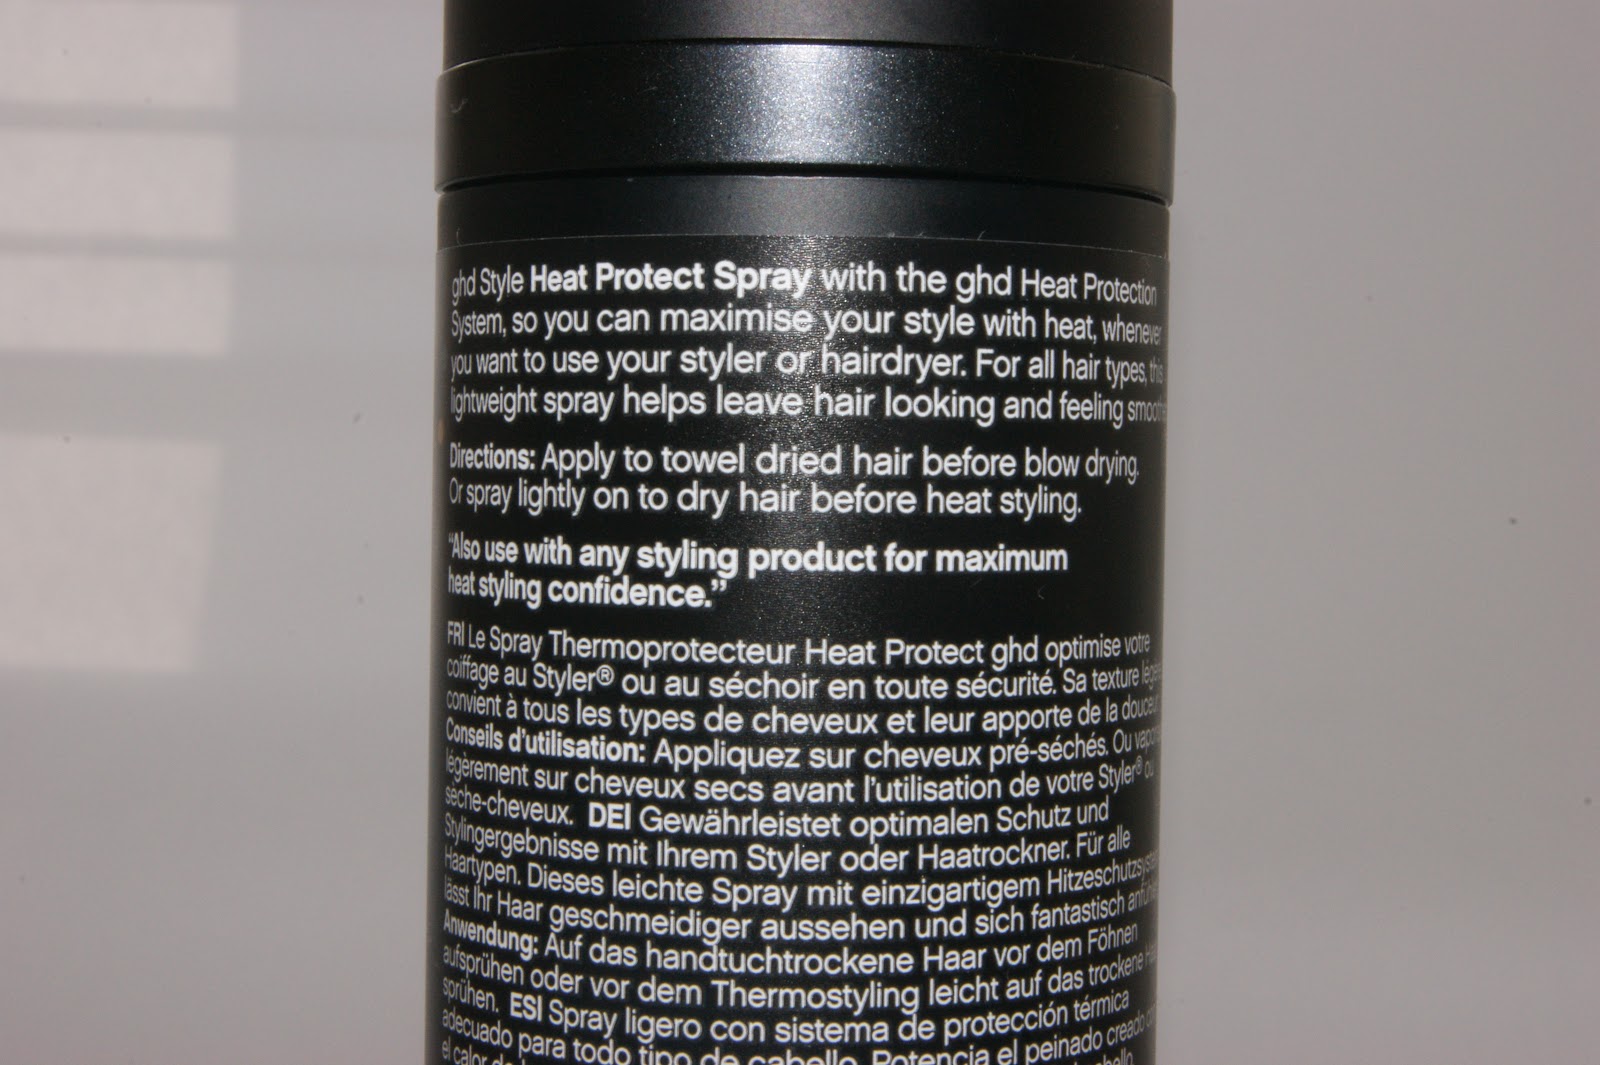 GHD Style Heat Protect Spray - Review | The Sunday Girl